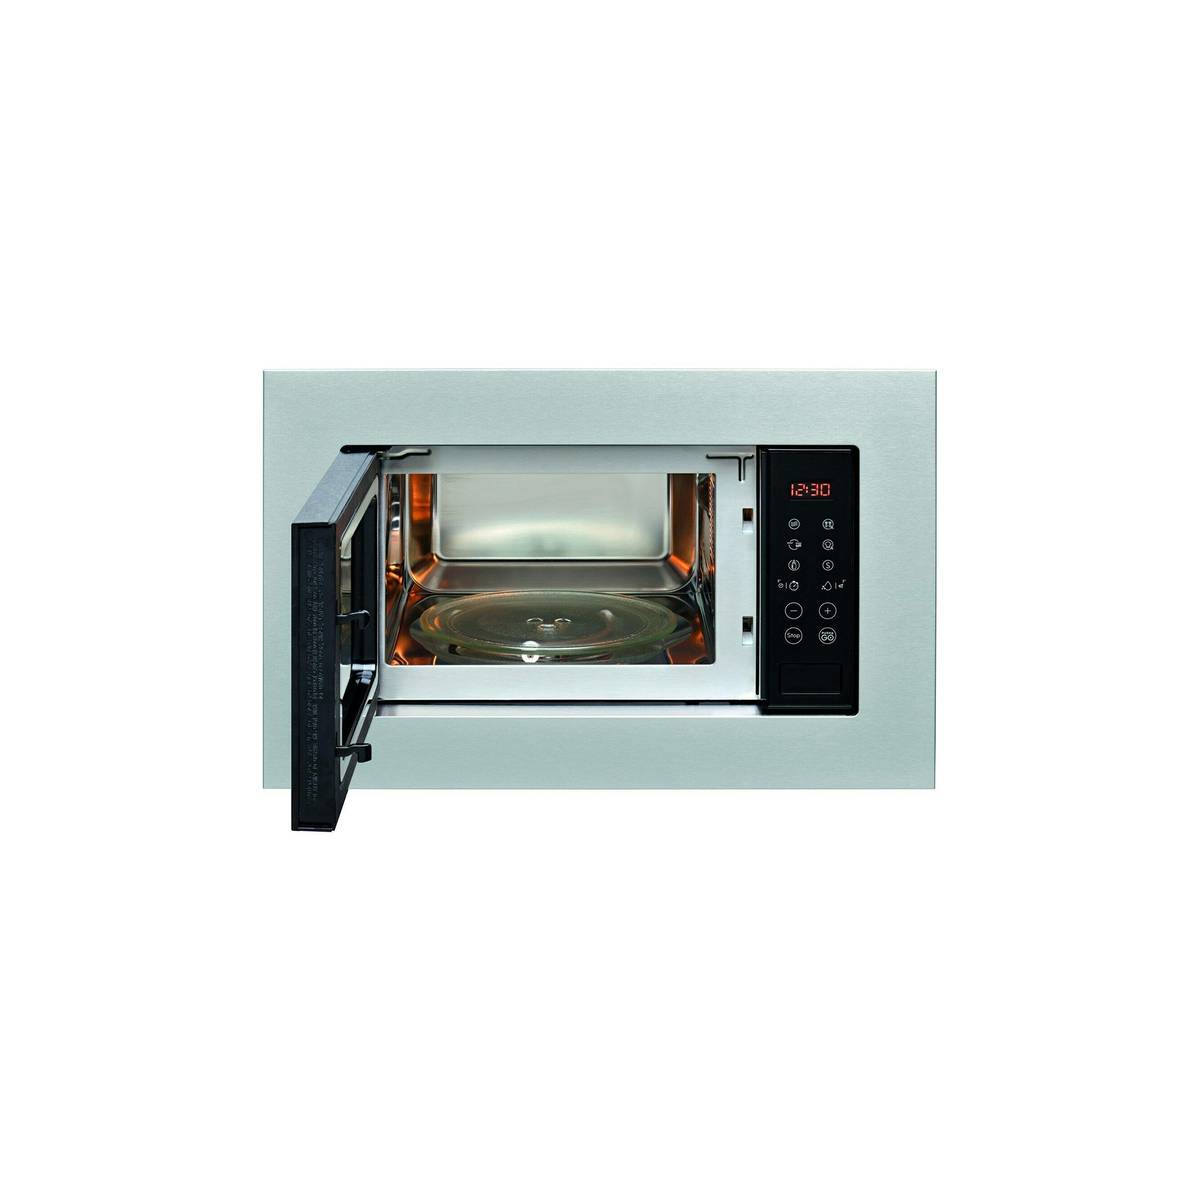 Indesit Built-in Microwave Oven MWI-120GXU 20Ltr